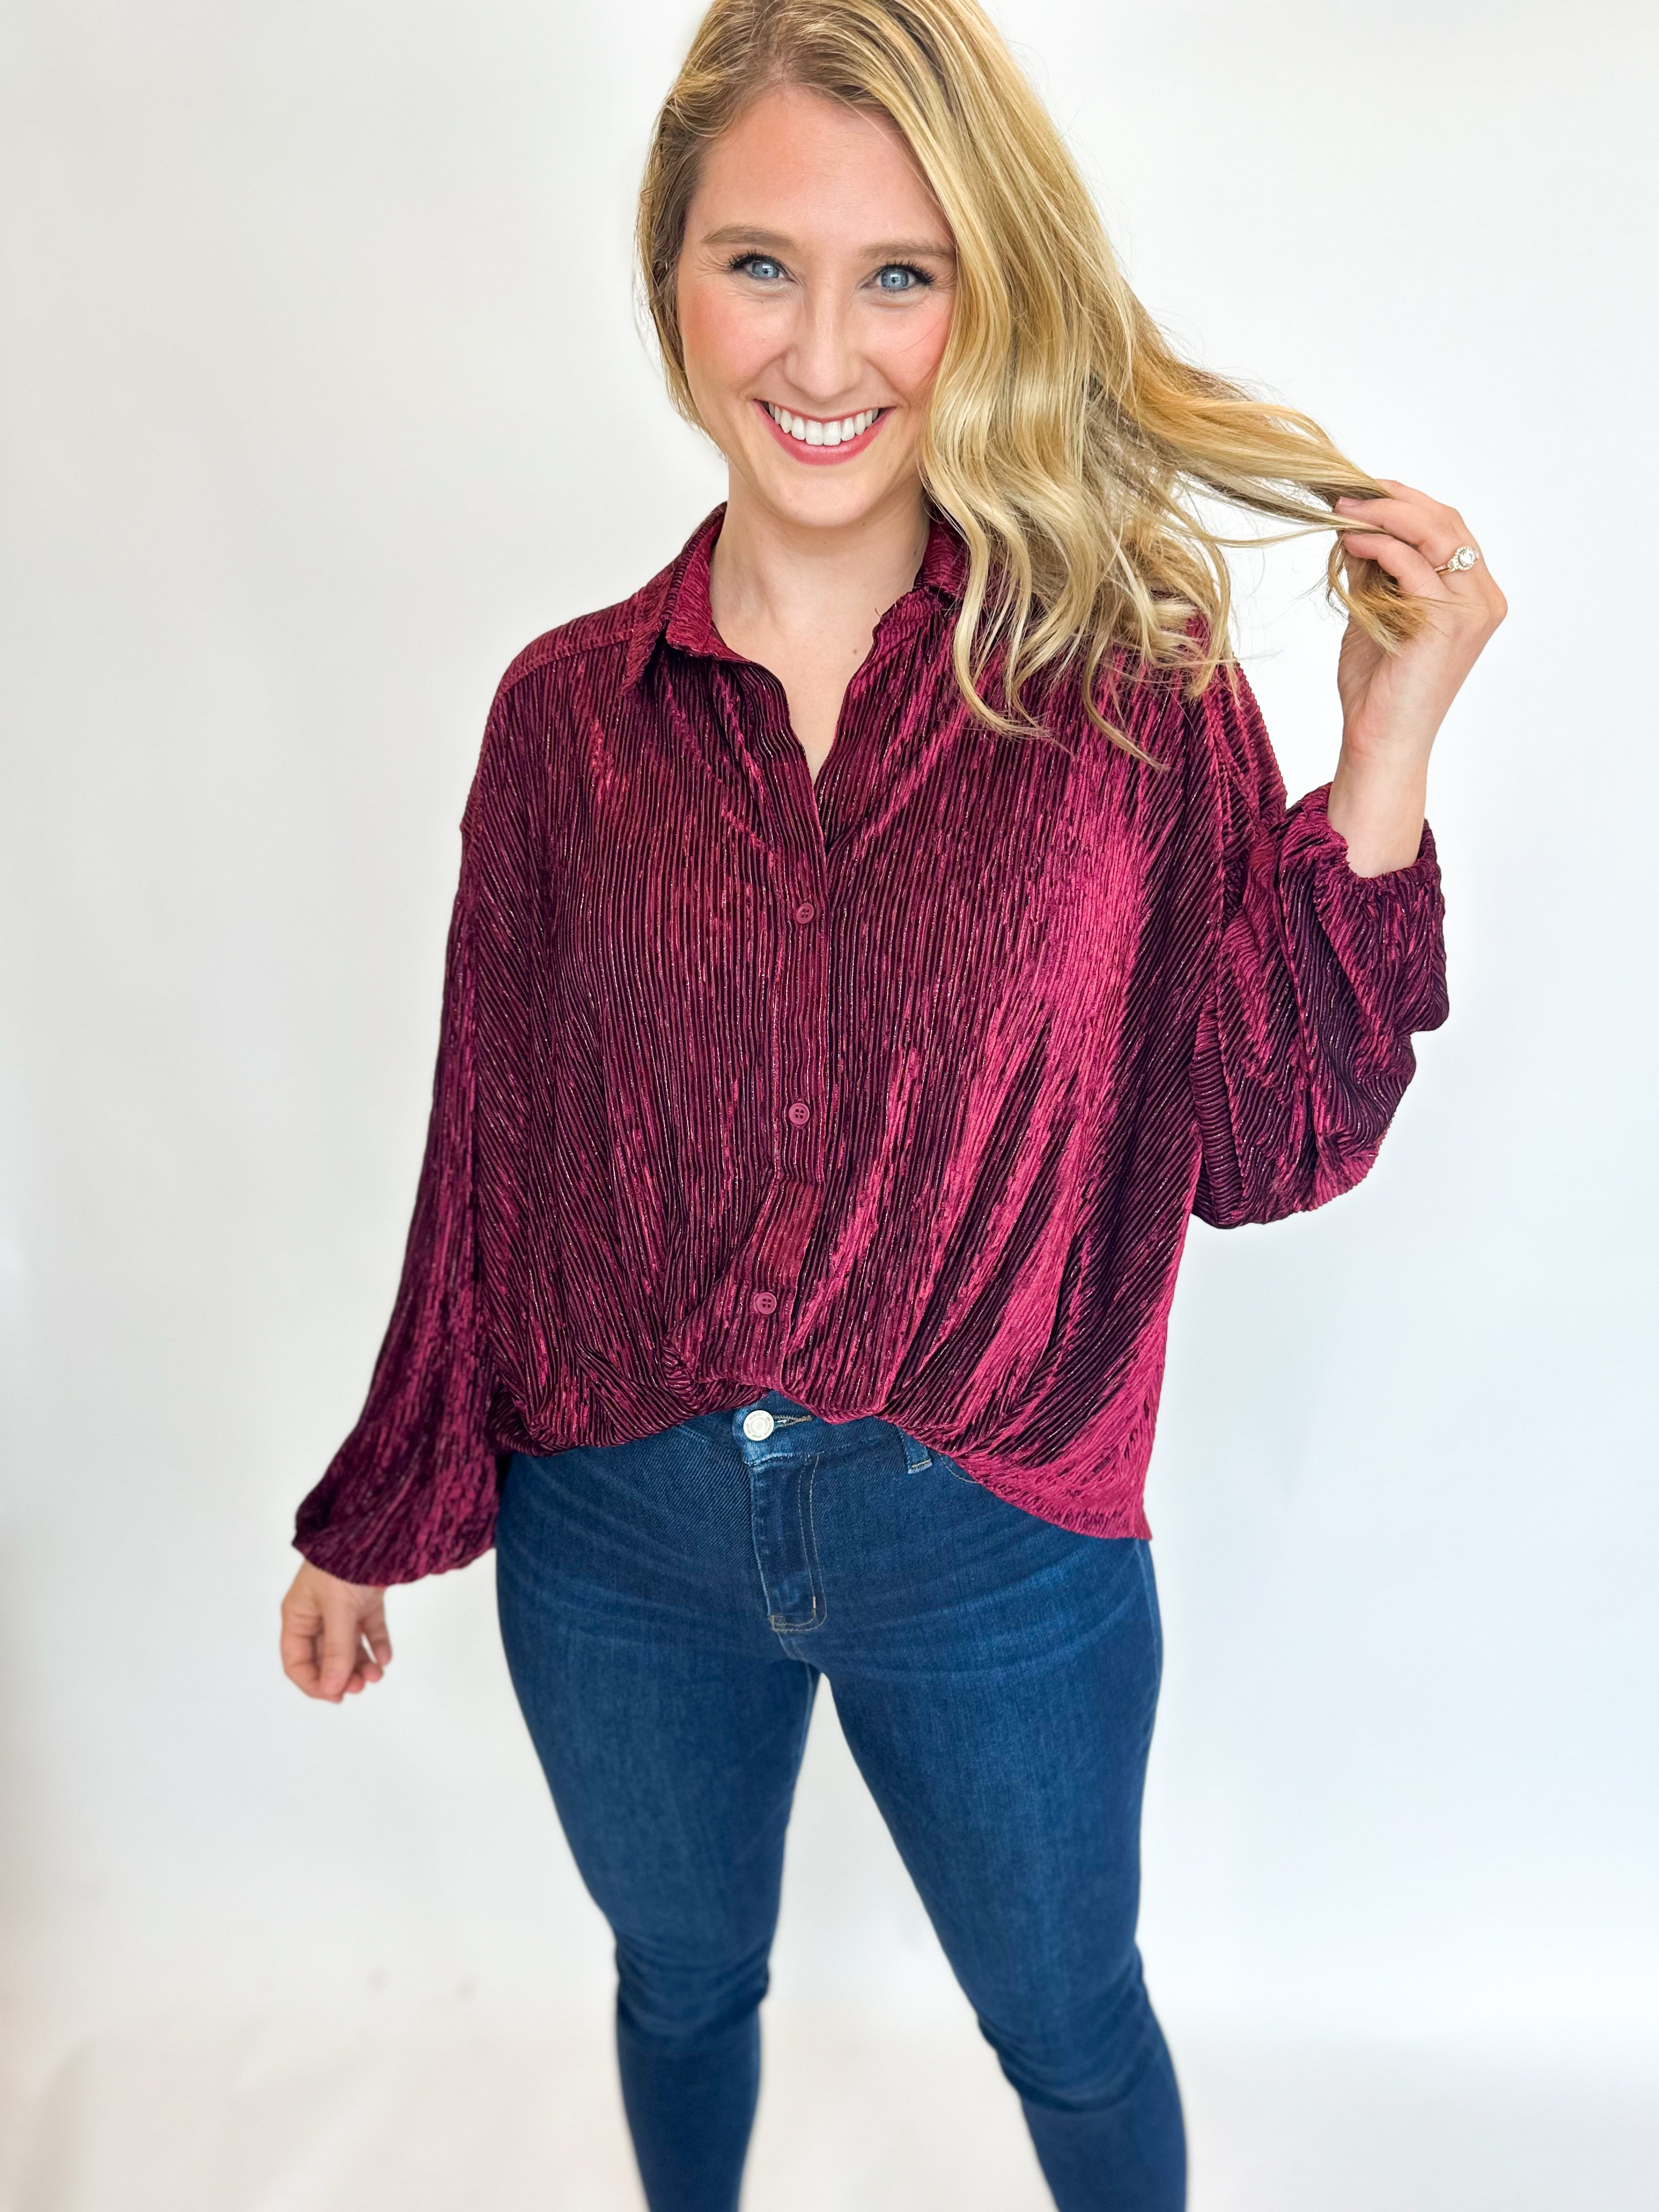 Textured Velvet Blouse - Burgundy-200 Fashion Blouses-SKIES ARE BLUE-July & June Women's Fashion Boutique Located in San Antonio, Texas